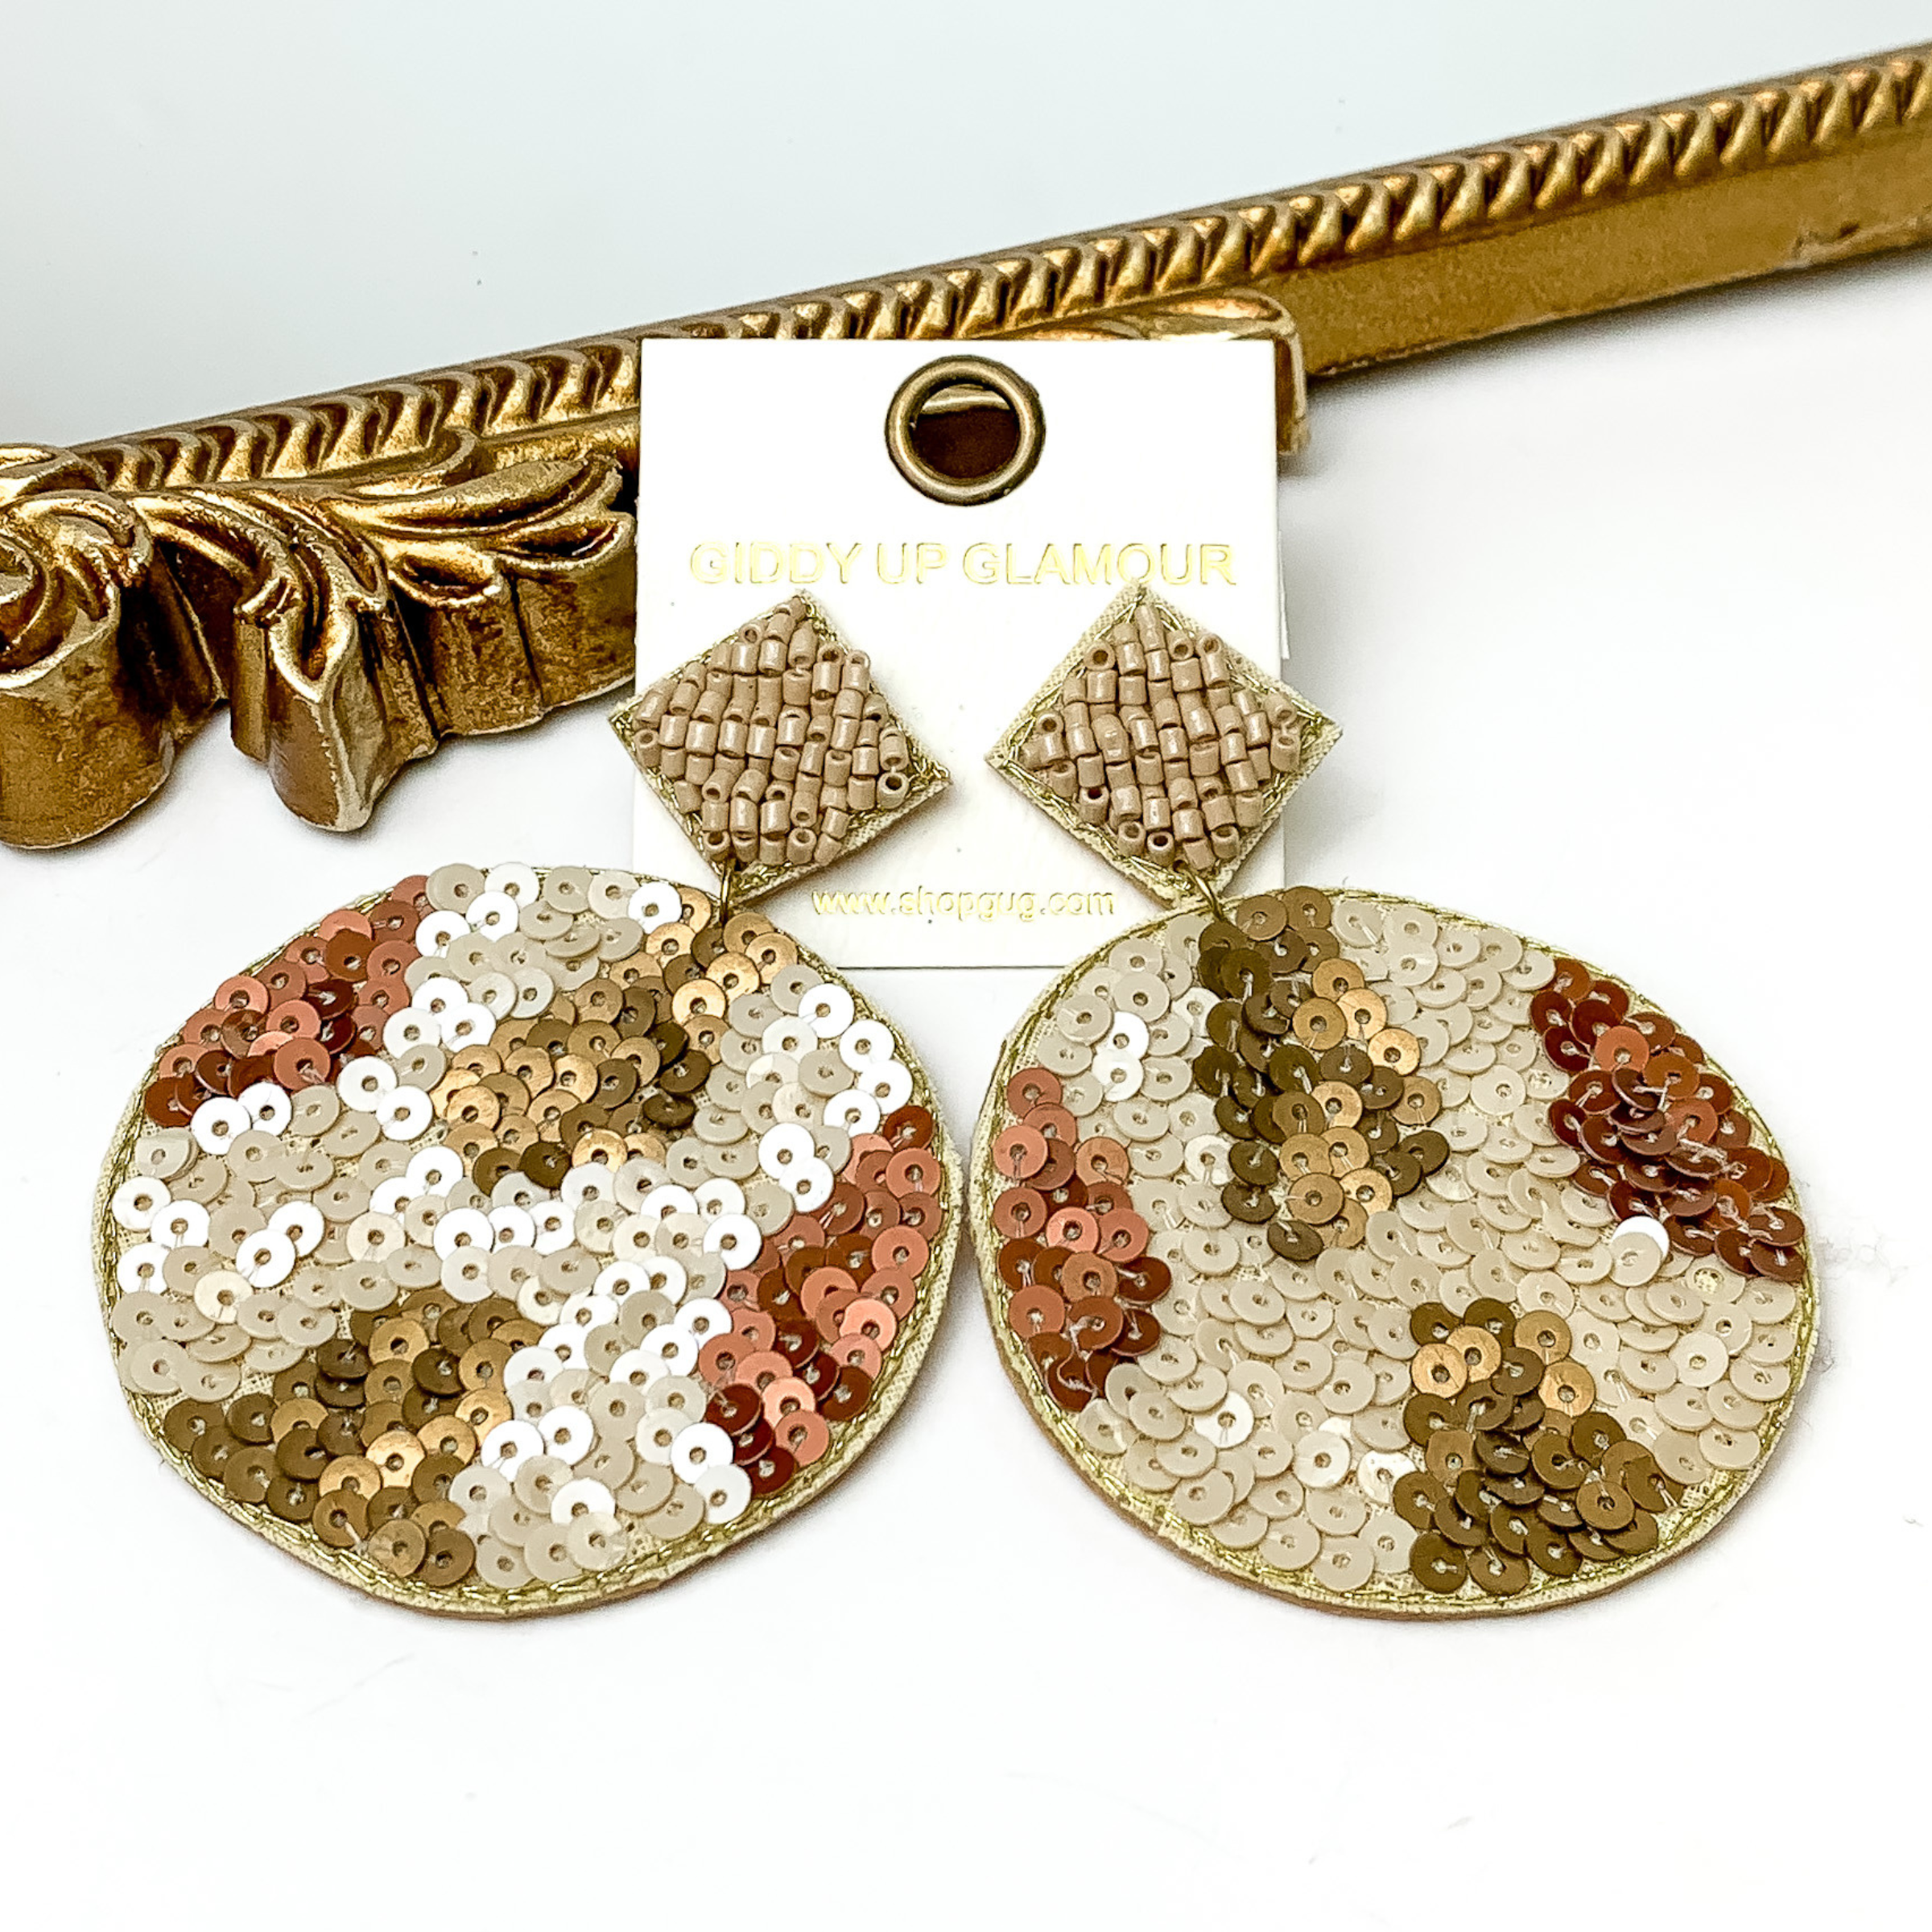 These are diamond post back, beige beaded earrings with a sequin beaded circle drop. These earrings include random spot pattern with bronze sequins, rust sequins, and nude sequins. These earrings are pictured in front of a gold mirror on a white background. 